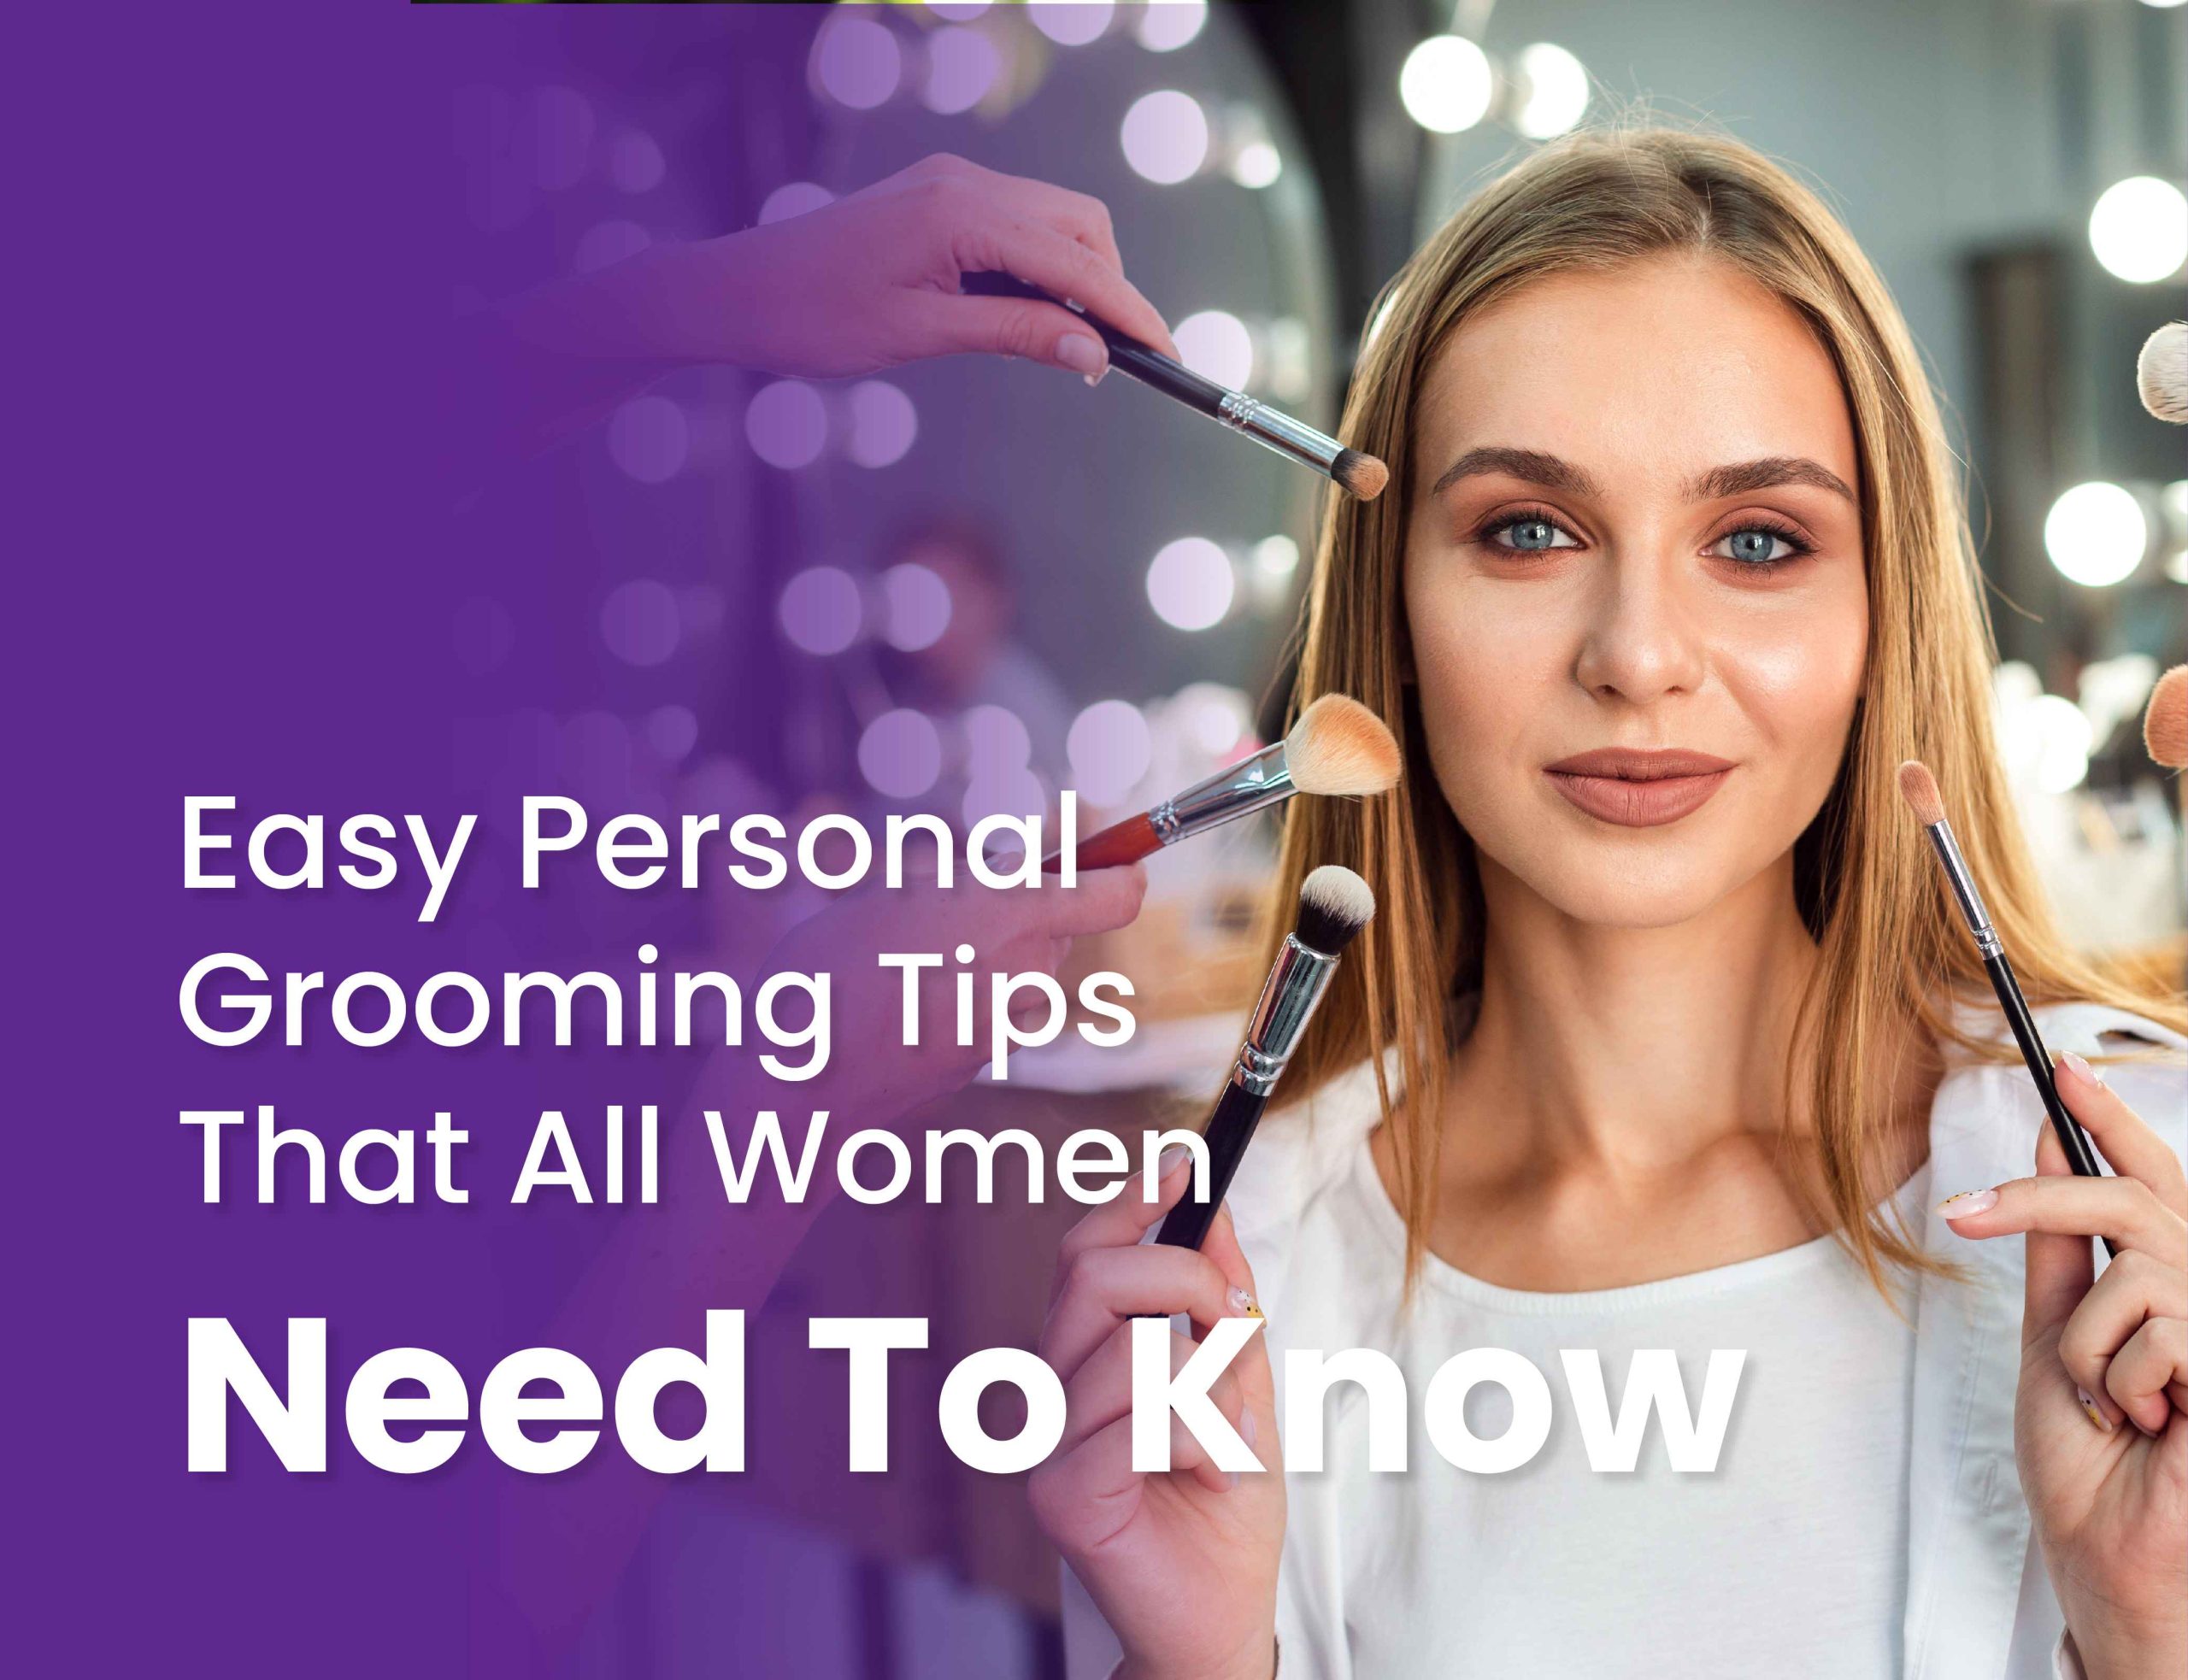 Easy Personal Grooming Tips That All Women Need To Know